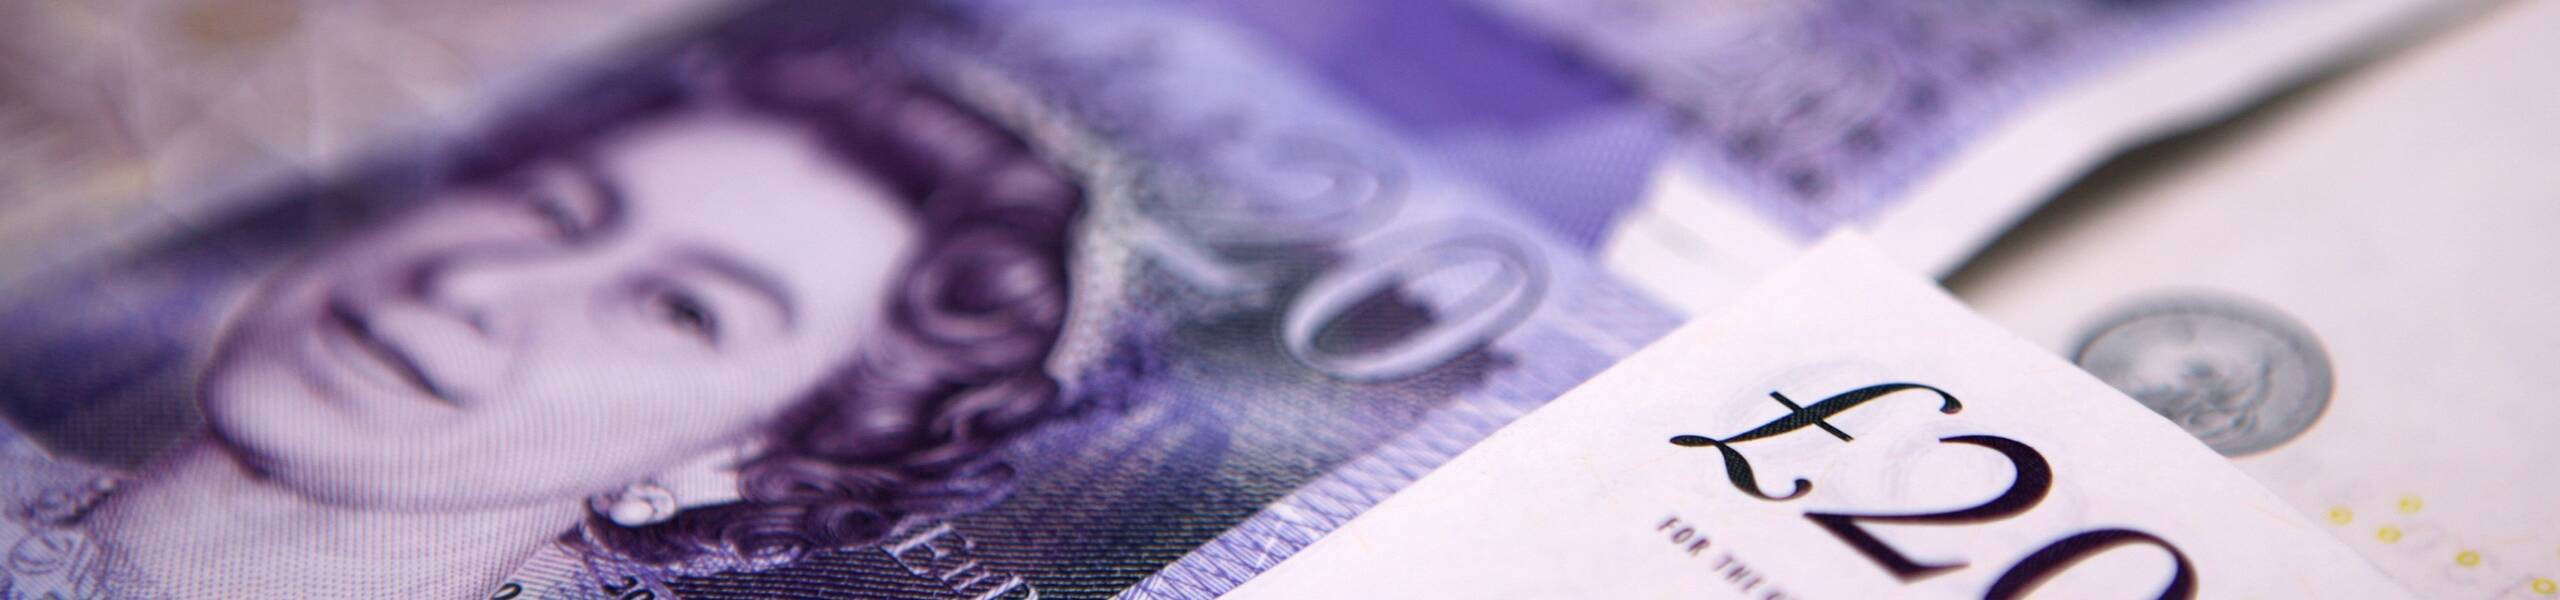 GBP/USD: 'Double Top' led to decline